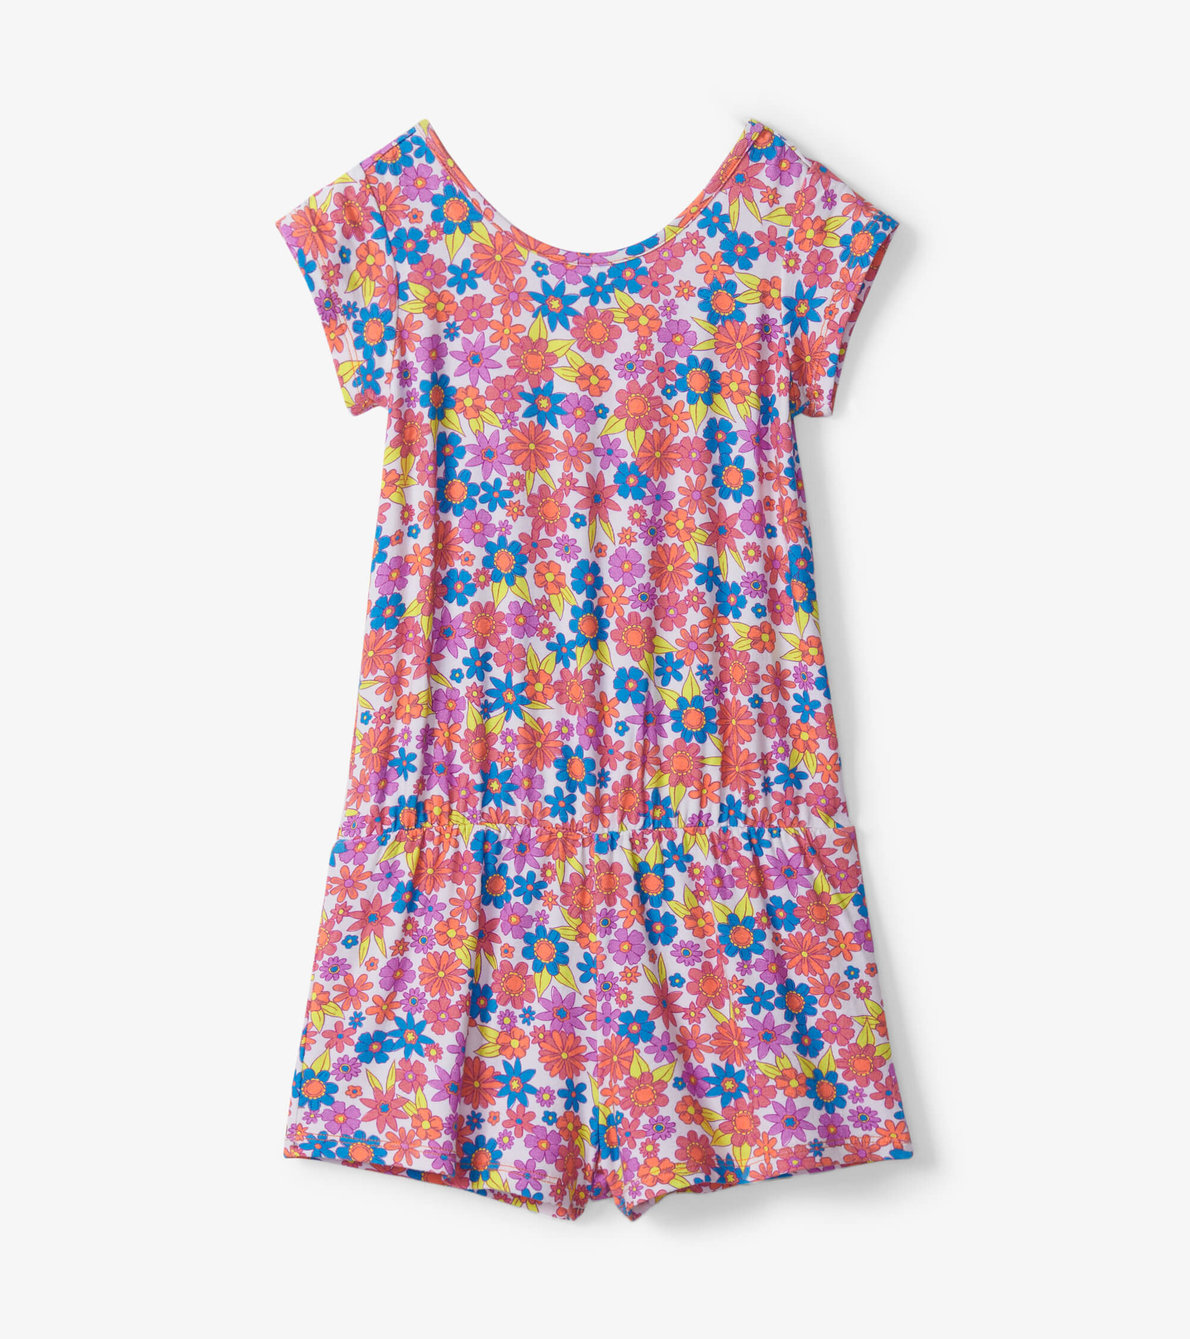 View larger image of Retro Floral Romper